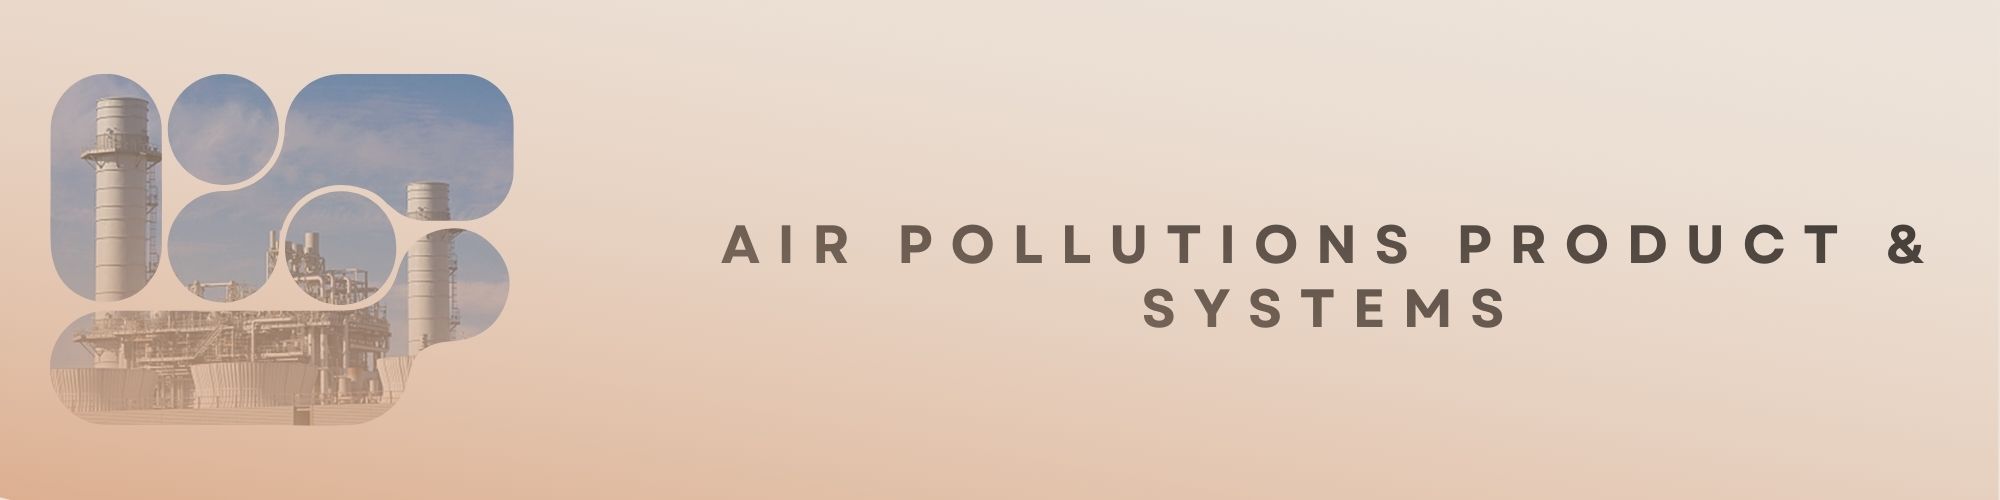 AIR POLLUTIONS PRODUCT & SYSTEMS